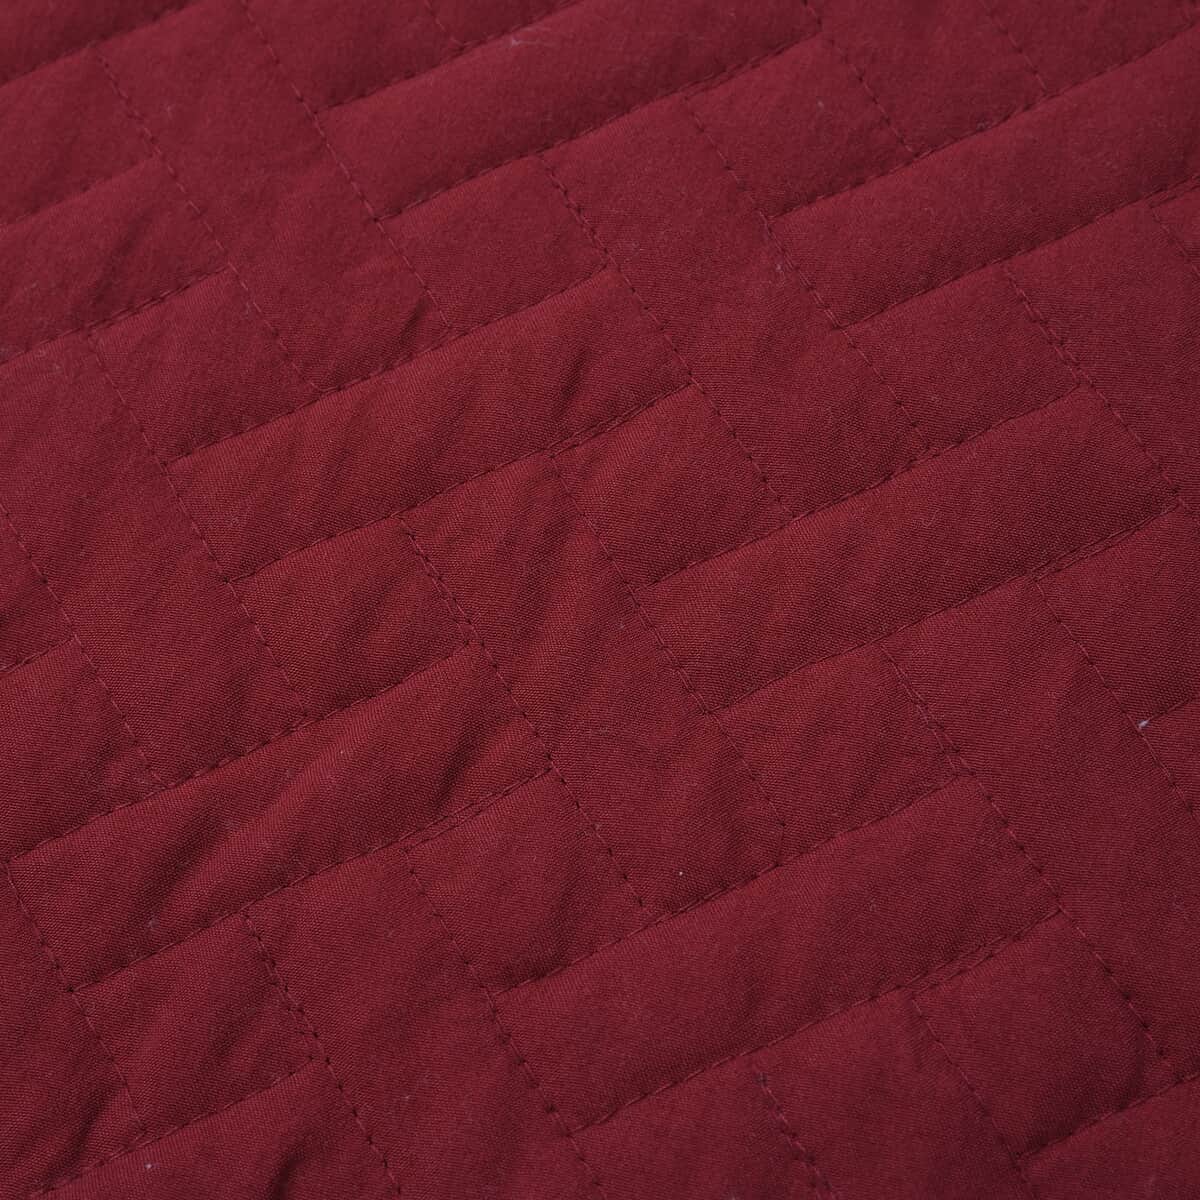 Homesmart Burgundy Solid Sherpa and Microfiber Quilt (Queen) and Set of 2 Shams image number 3